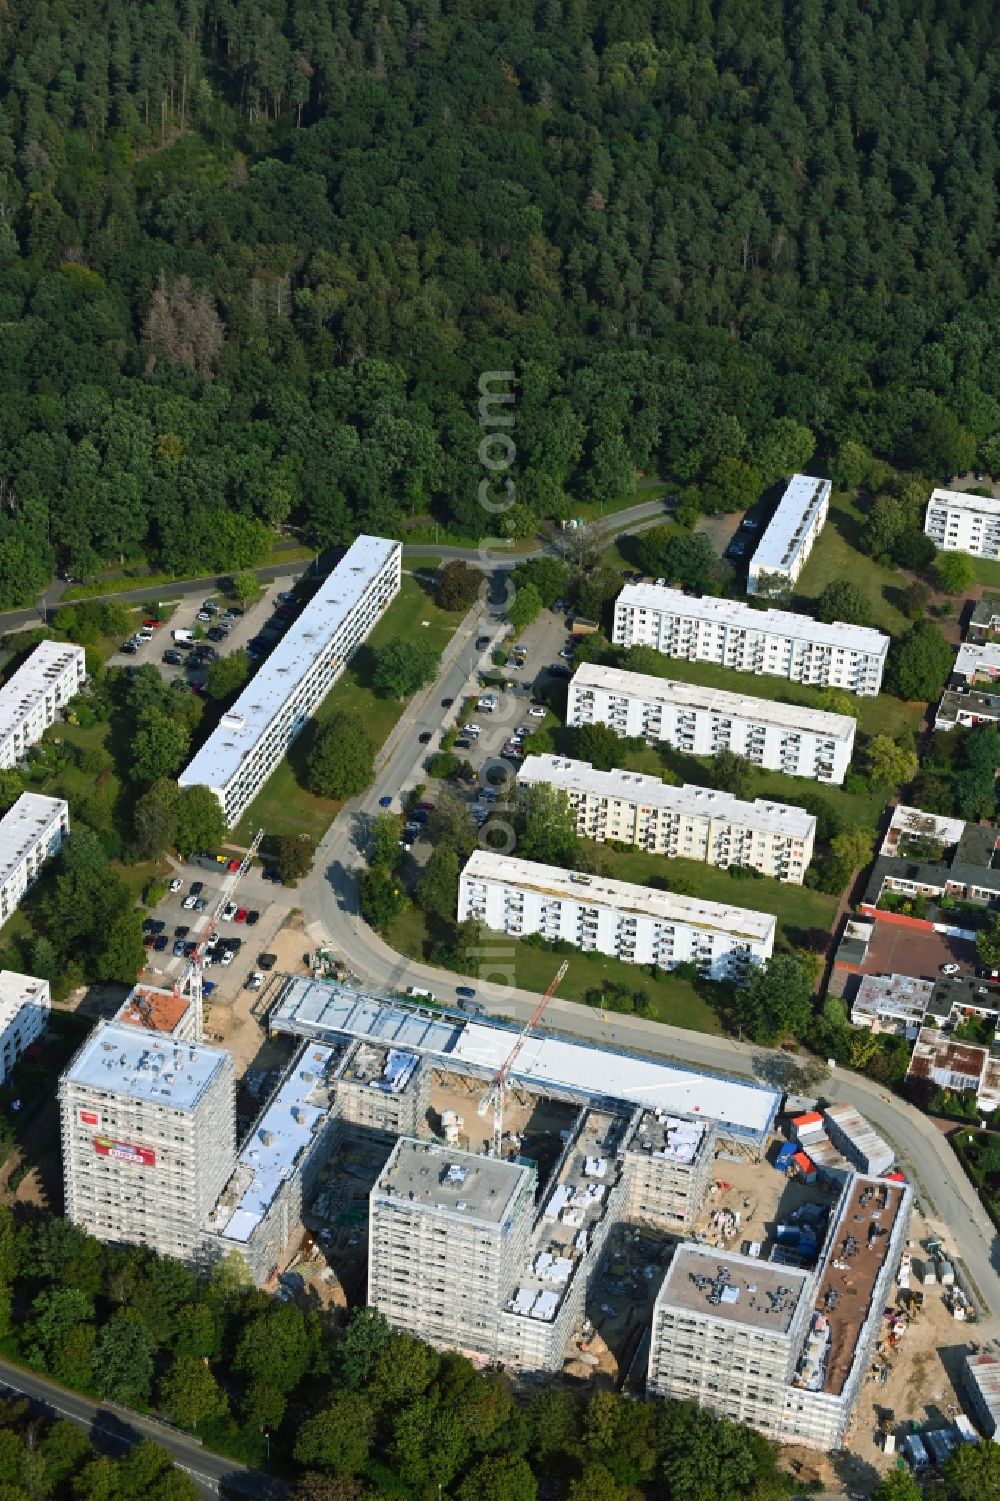 Aerial image Wolfsburg - Construction site for new high-rise building complex Wohnanlage Kurt 2.0 on Kurt - Schumacher - Ring in the district Detmerode in Wolfsburg in the state Lower Saxony, Germany